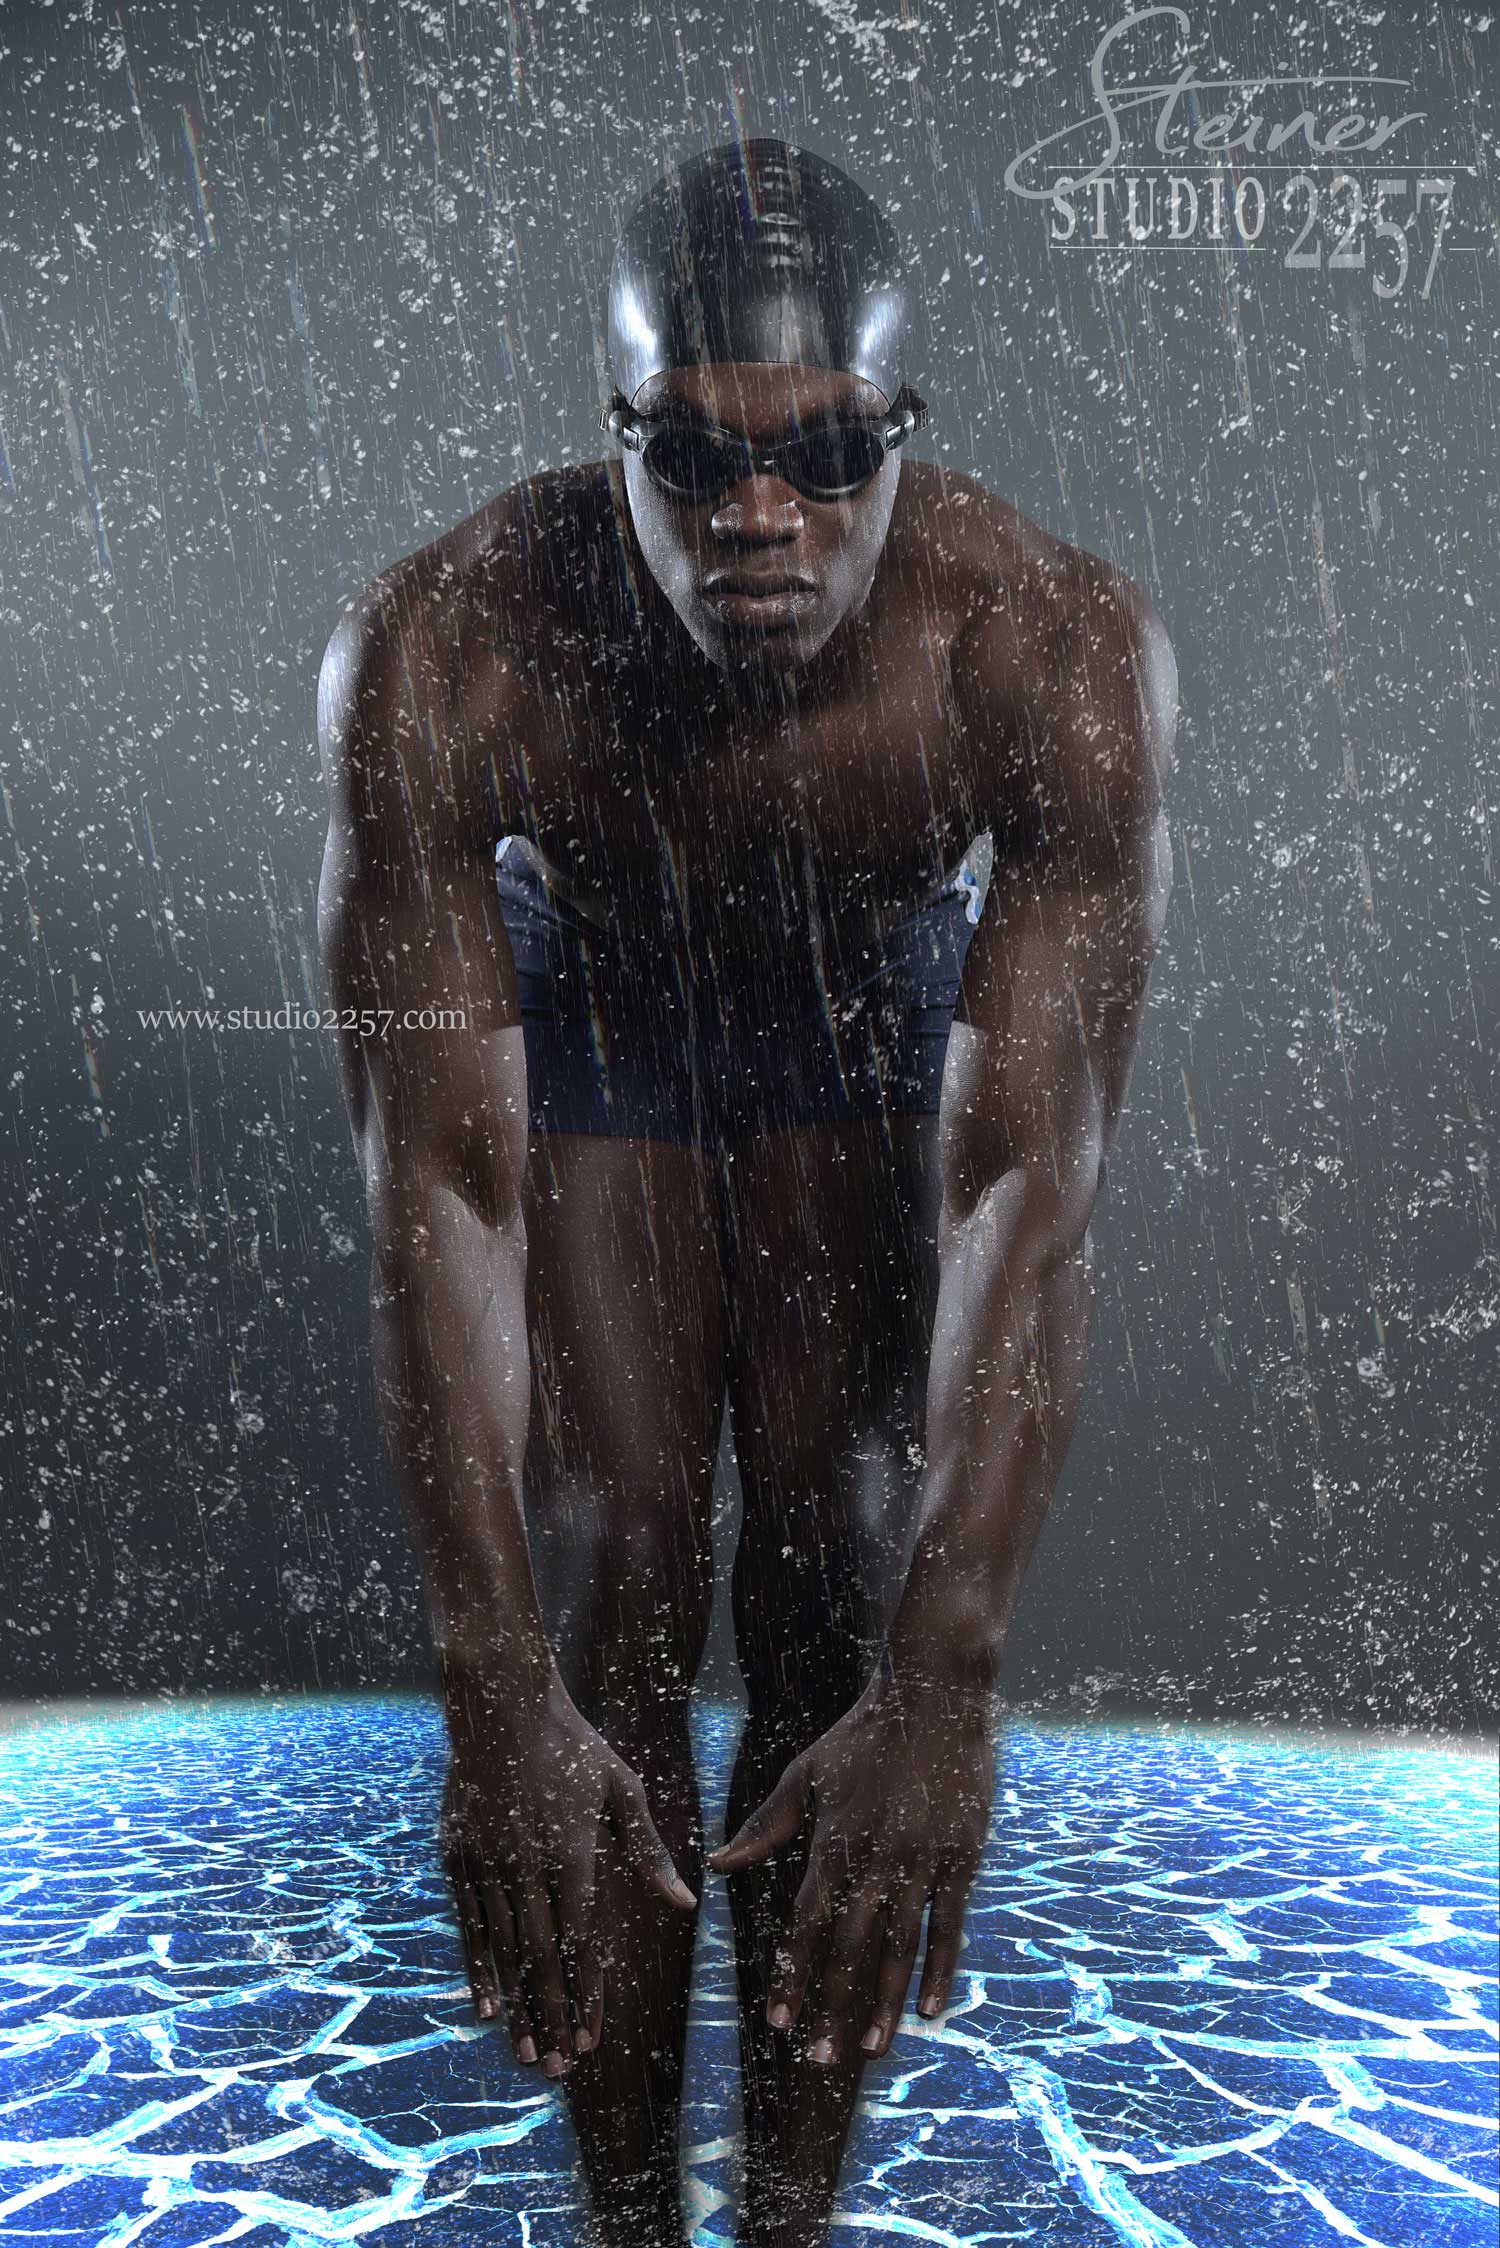 swimmer-with-goggles-in-rain-w.jpg